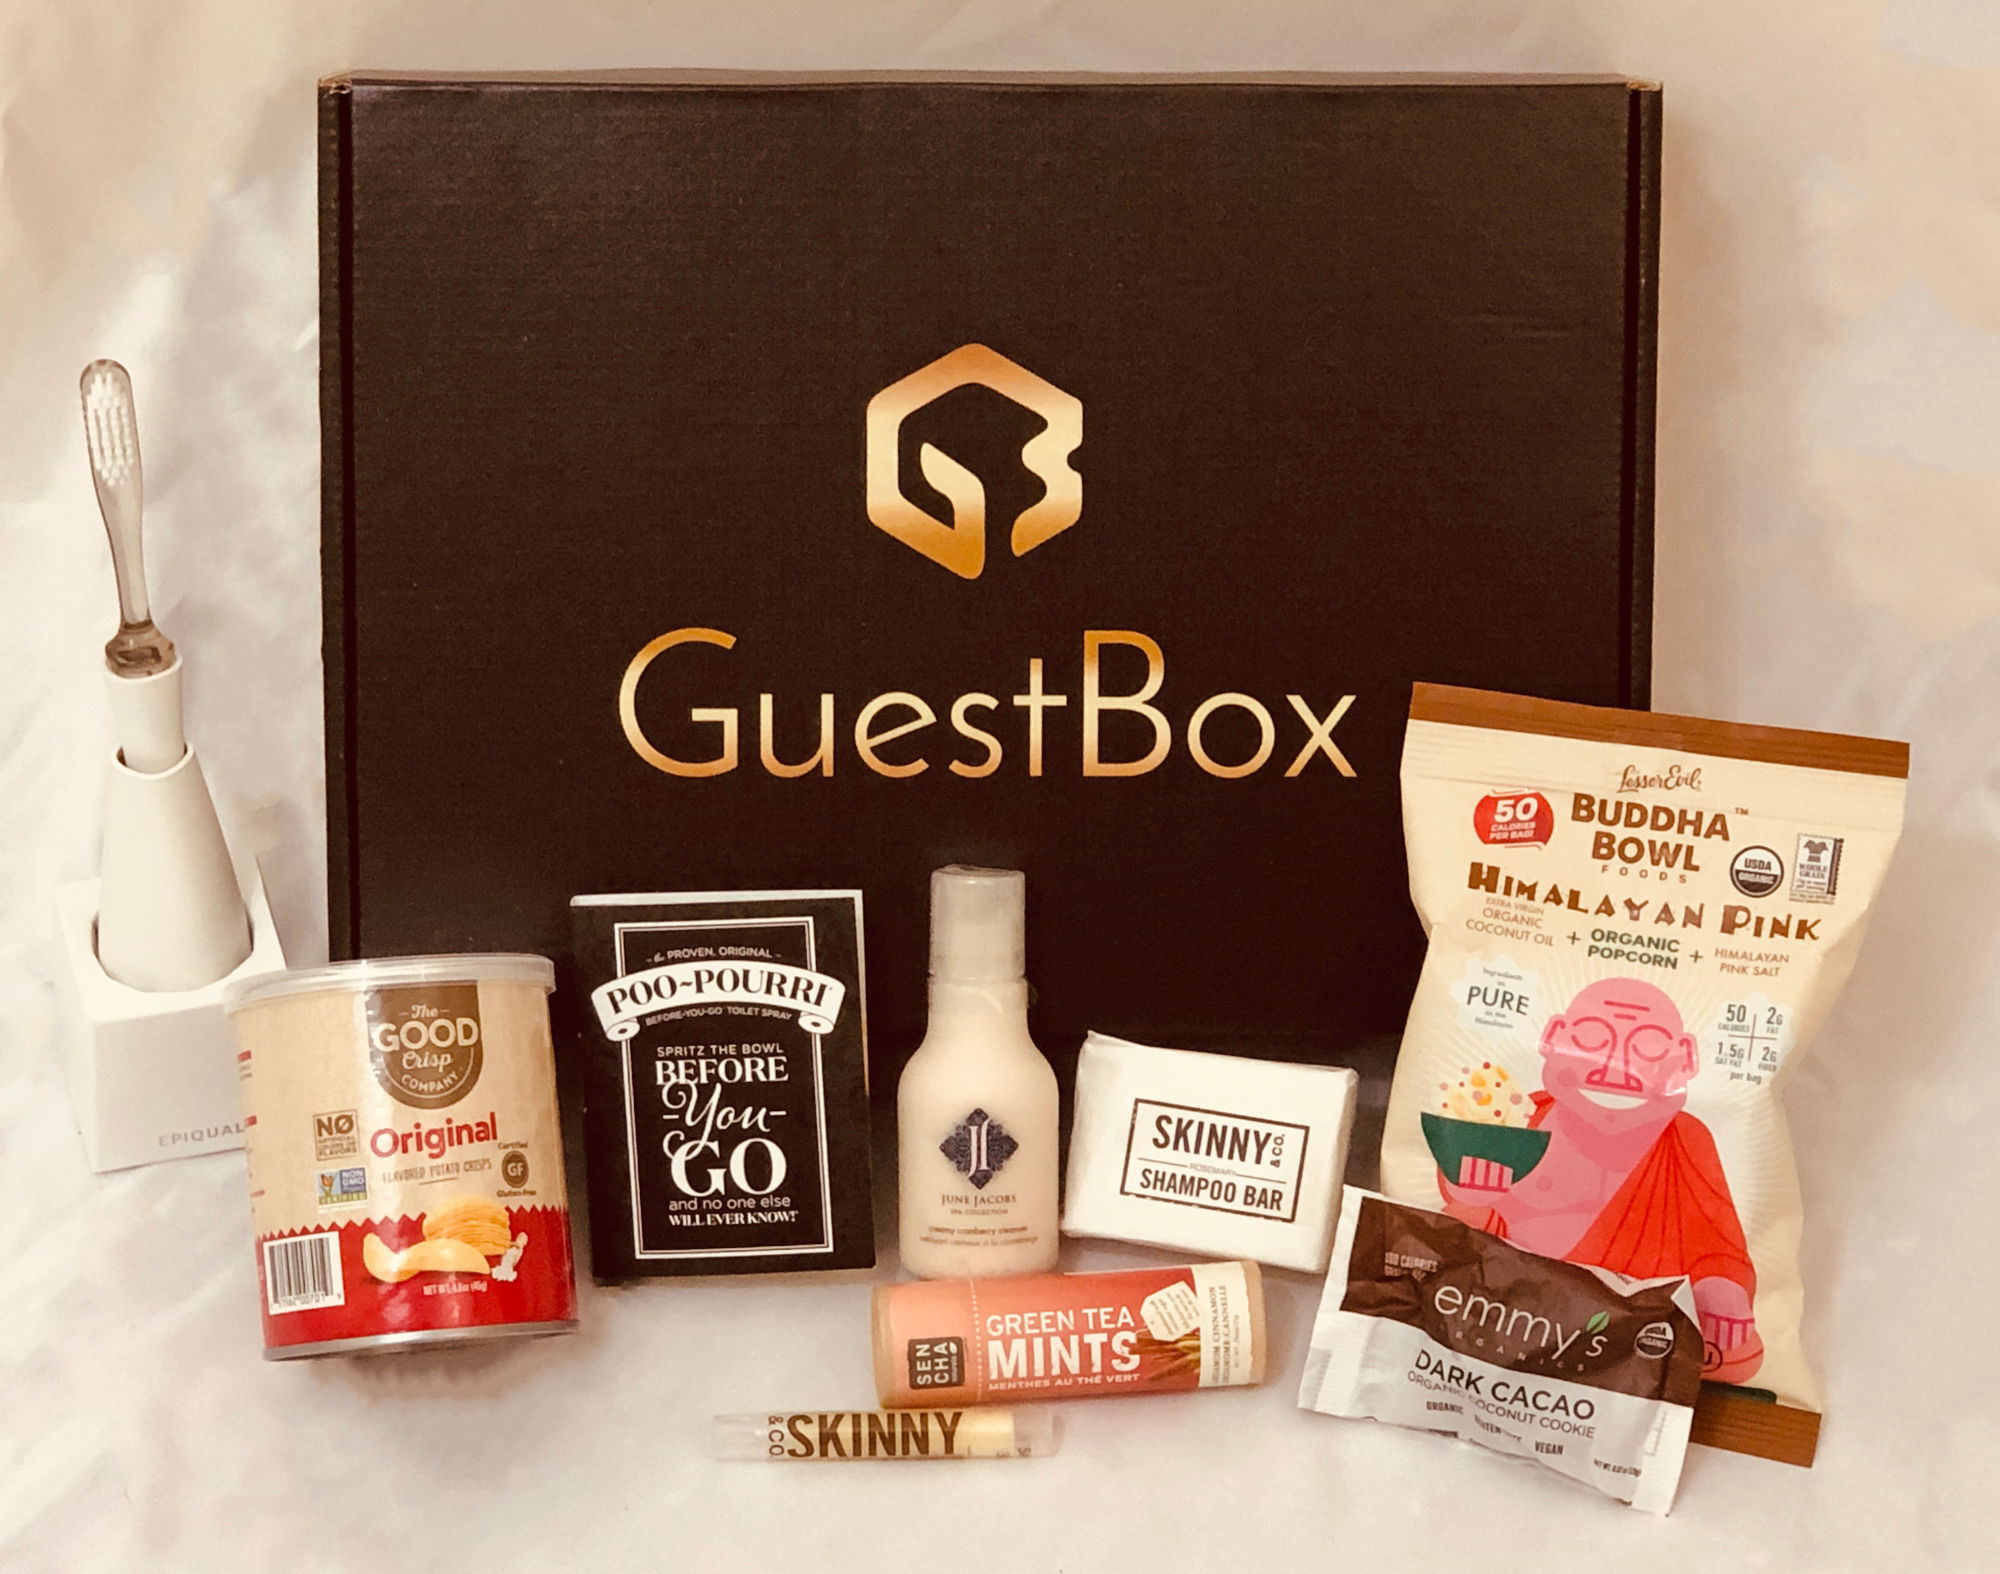 Courtesy. A GuestBox includes toiletries, snacks and skincare products for people staying at hotels and other rental properties.